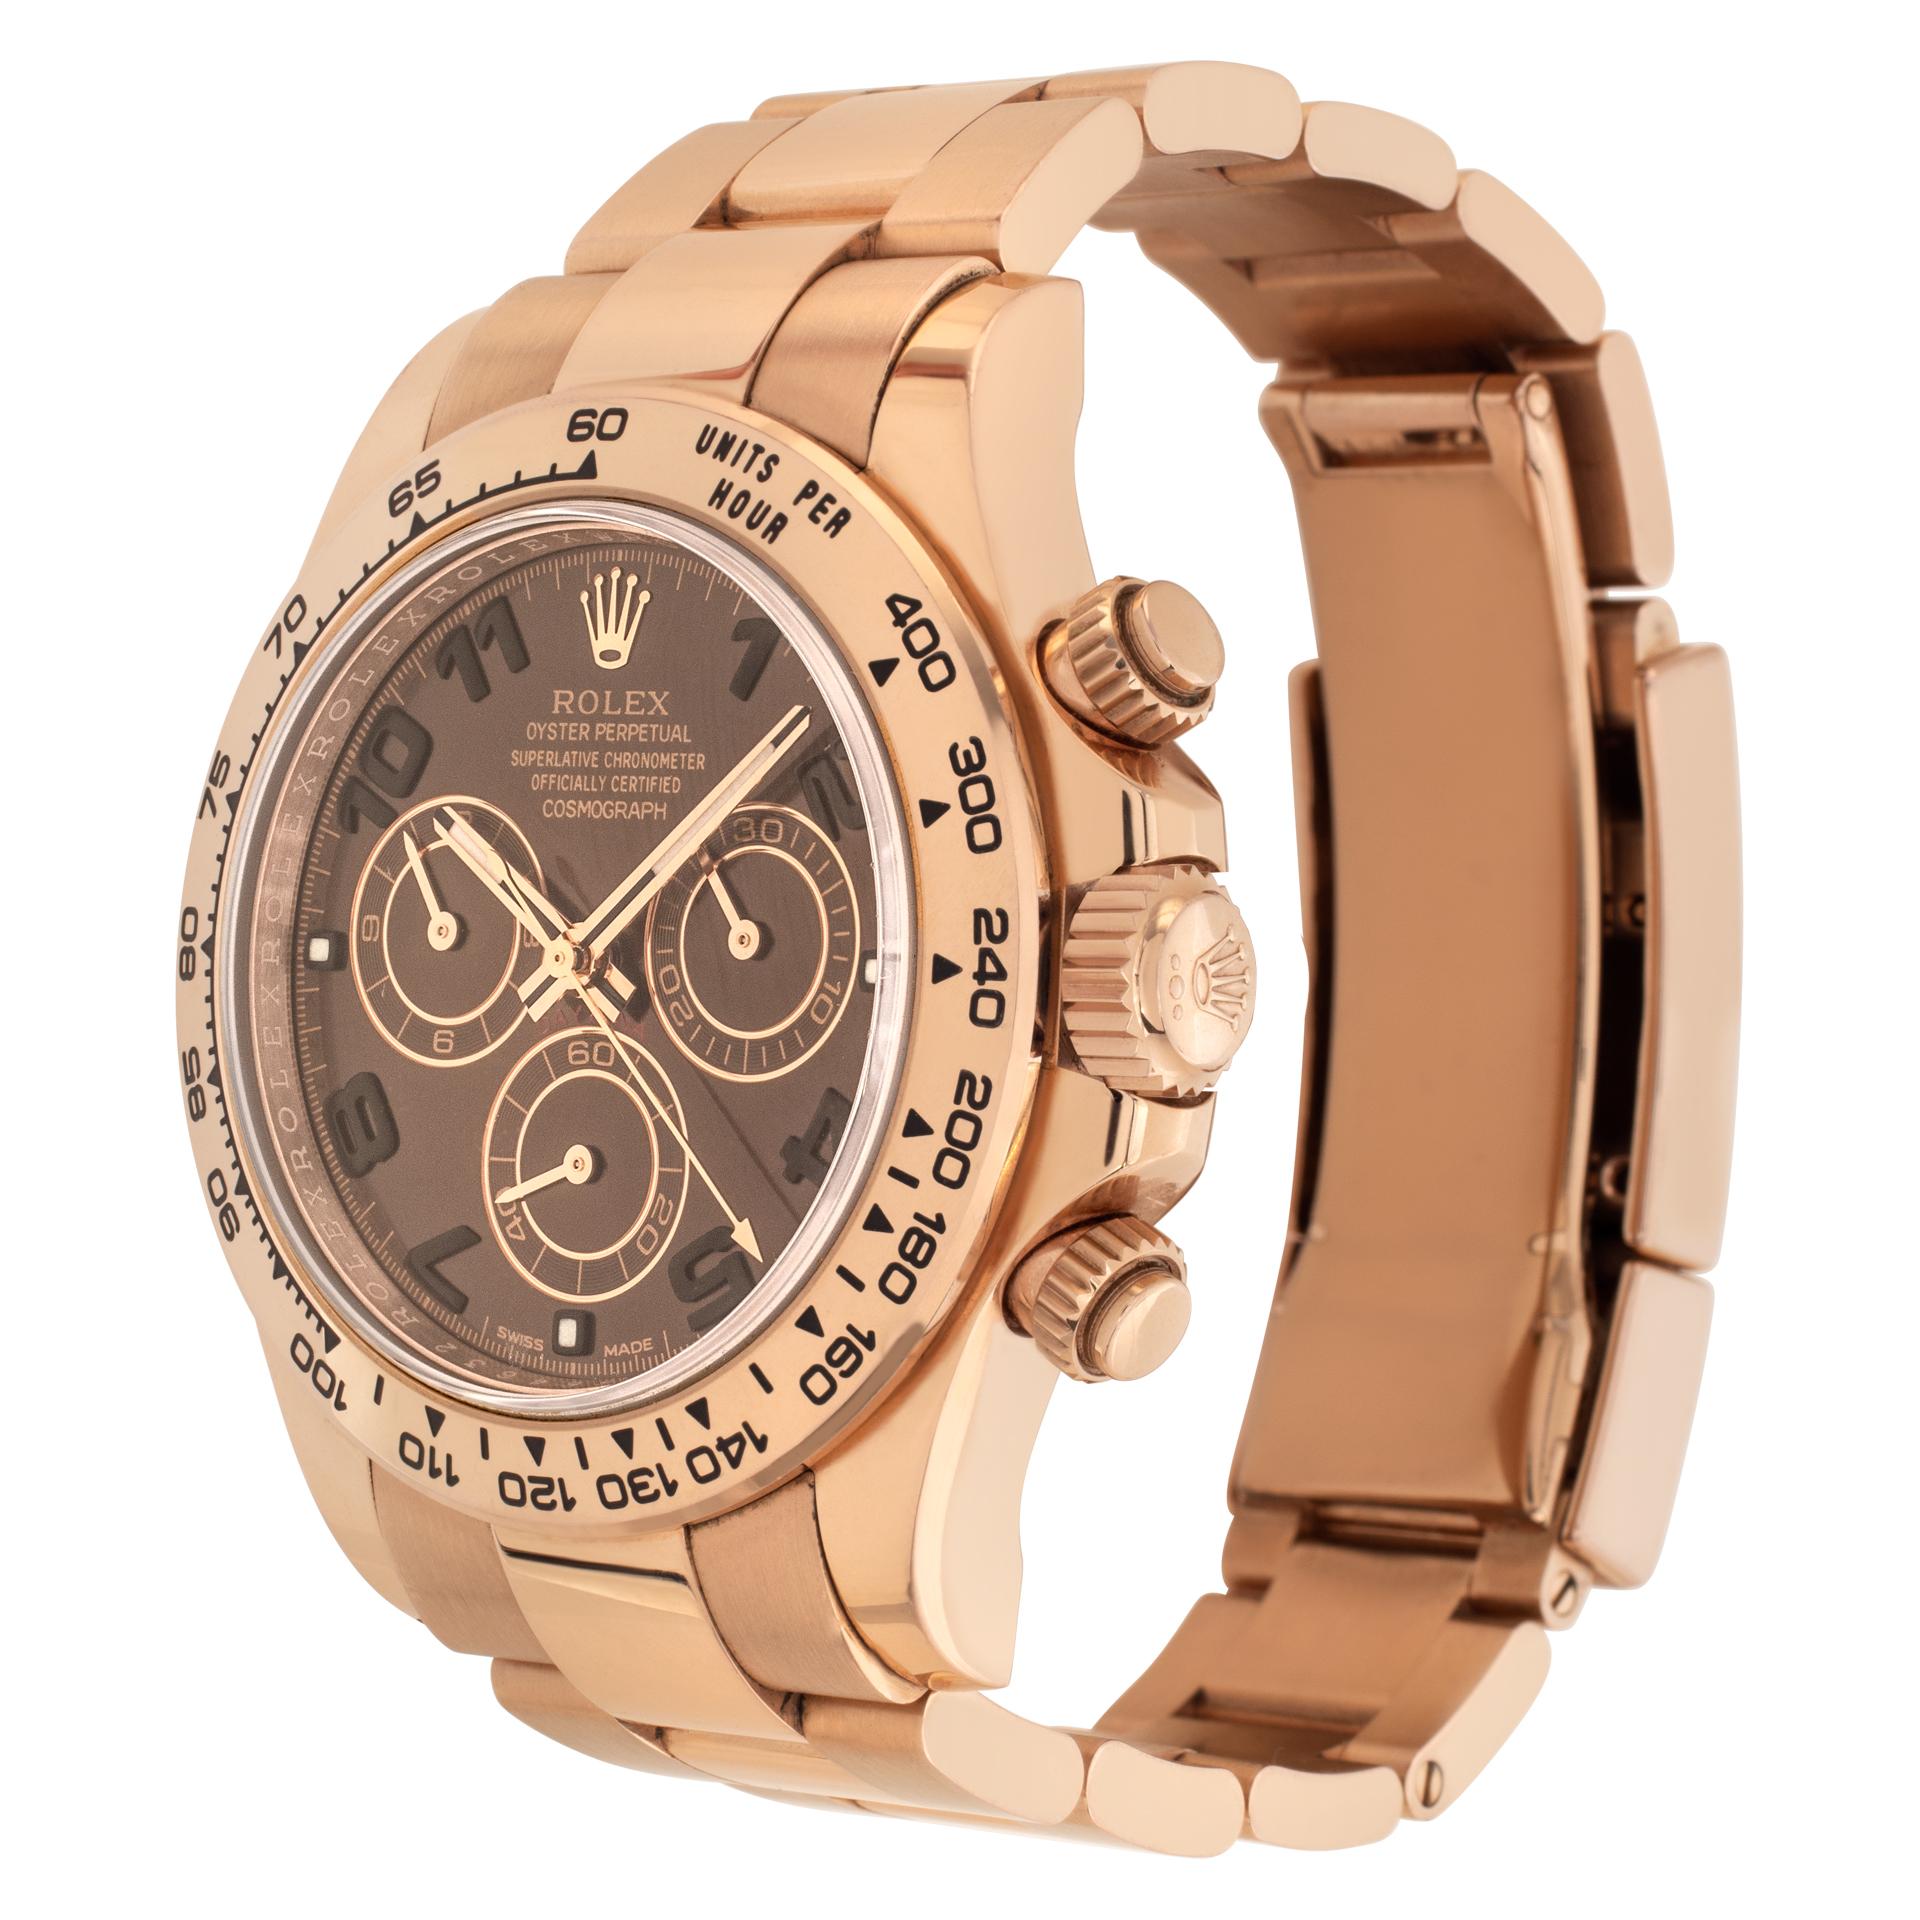 Rolex Daytona in 18k Everose gold with with collectible Racing chocolate dial. Auto w/ sweep seconds, date and chronograph. 40 mm case size. With box and papers. Ref 116505. Circa 2015 **Bank wire only at this price** Fine Pre-owned Rolex Watch.